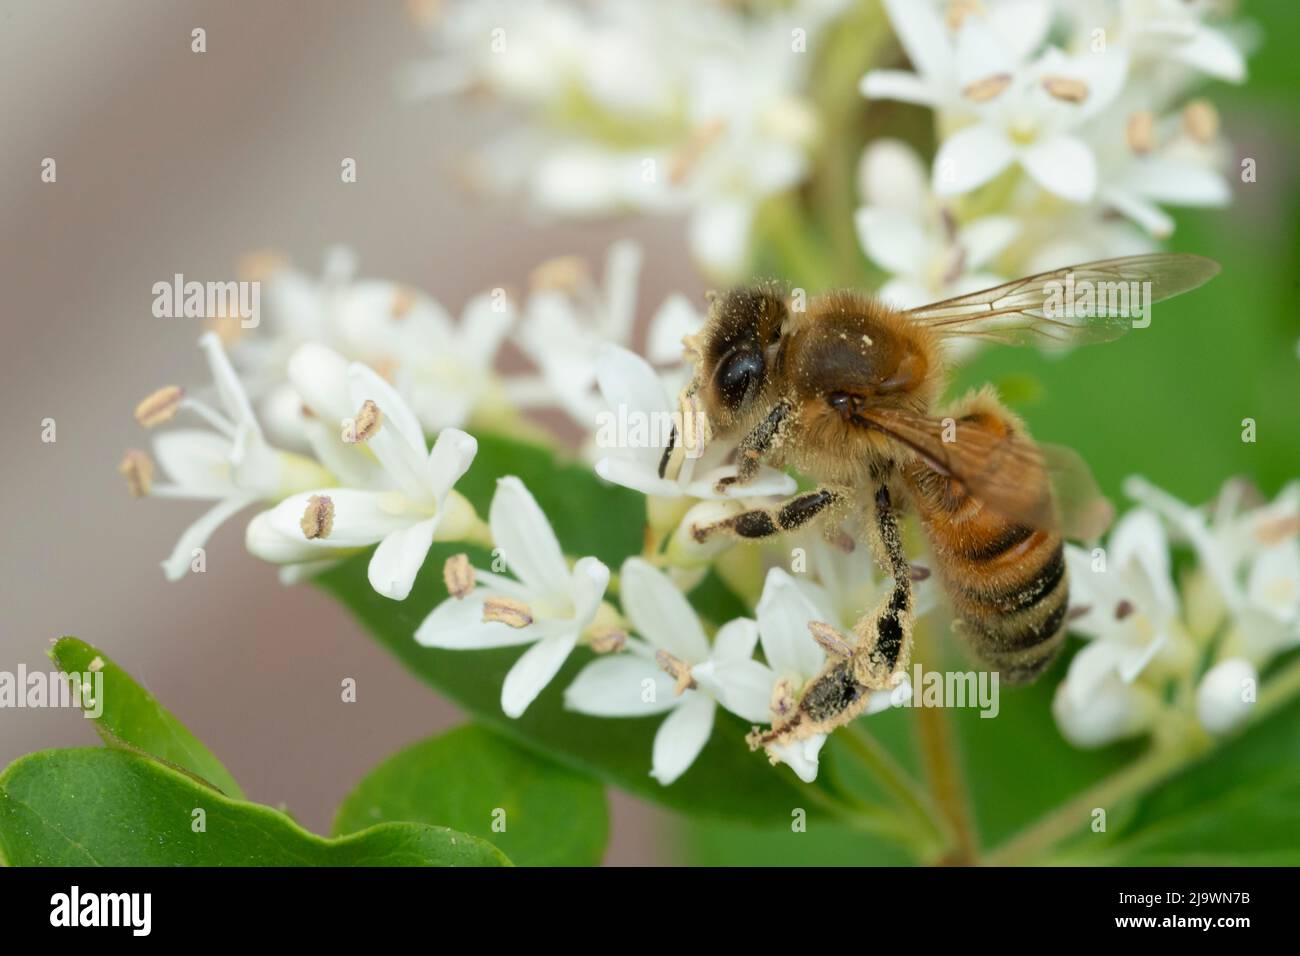 Italy, Lombardy, Bee Gathering Pollen on Chinese Privet Flowers, Ligustrum Sinense Stock Photo